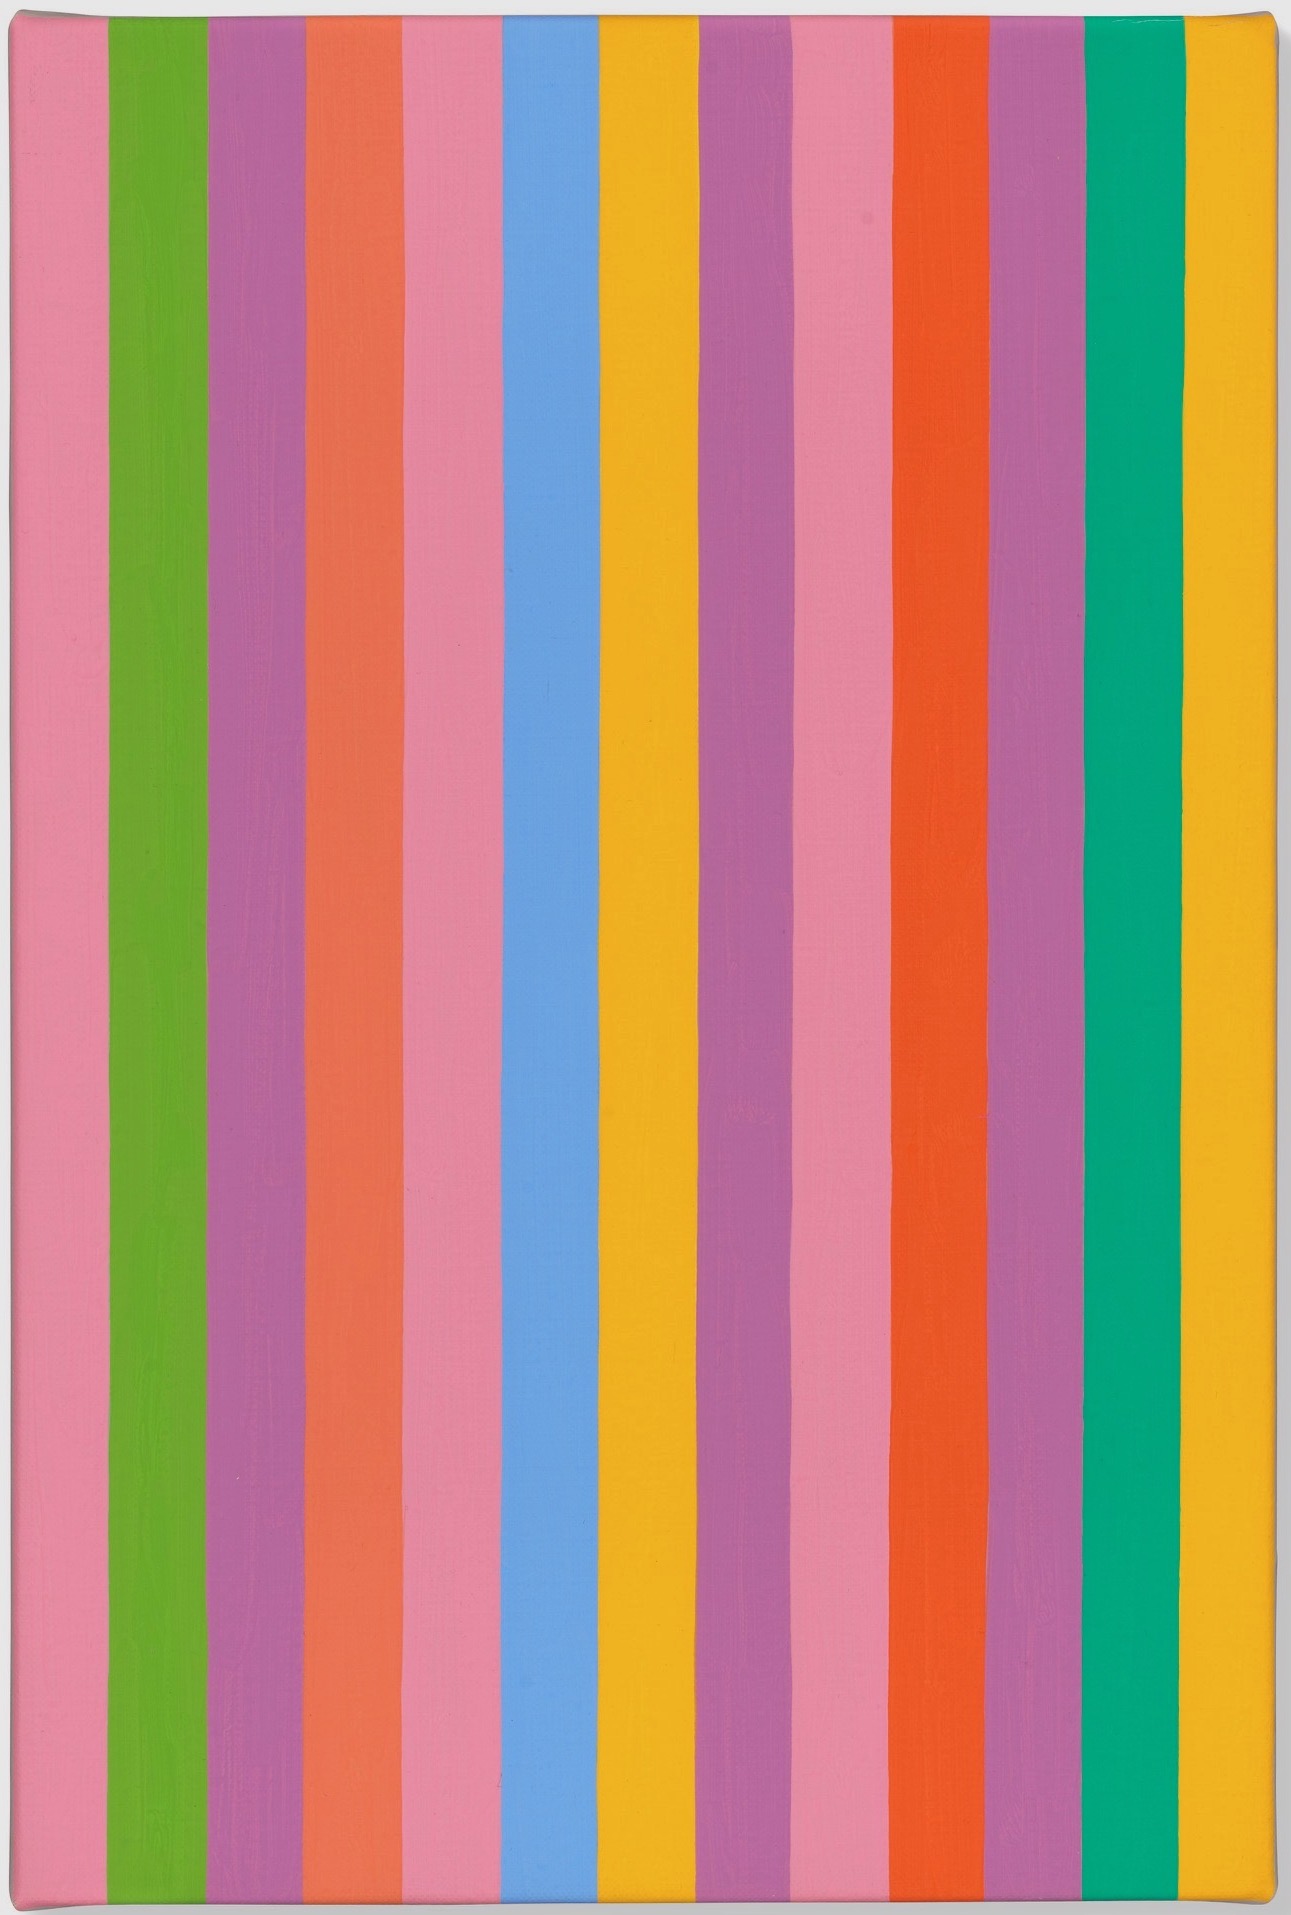 'Rose Rose 12' by Bridget Riley at Tanya Baxter Contemporary at LAPADA Fair 2023 in Effect Magazine / Effetto